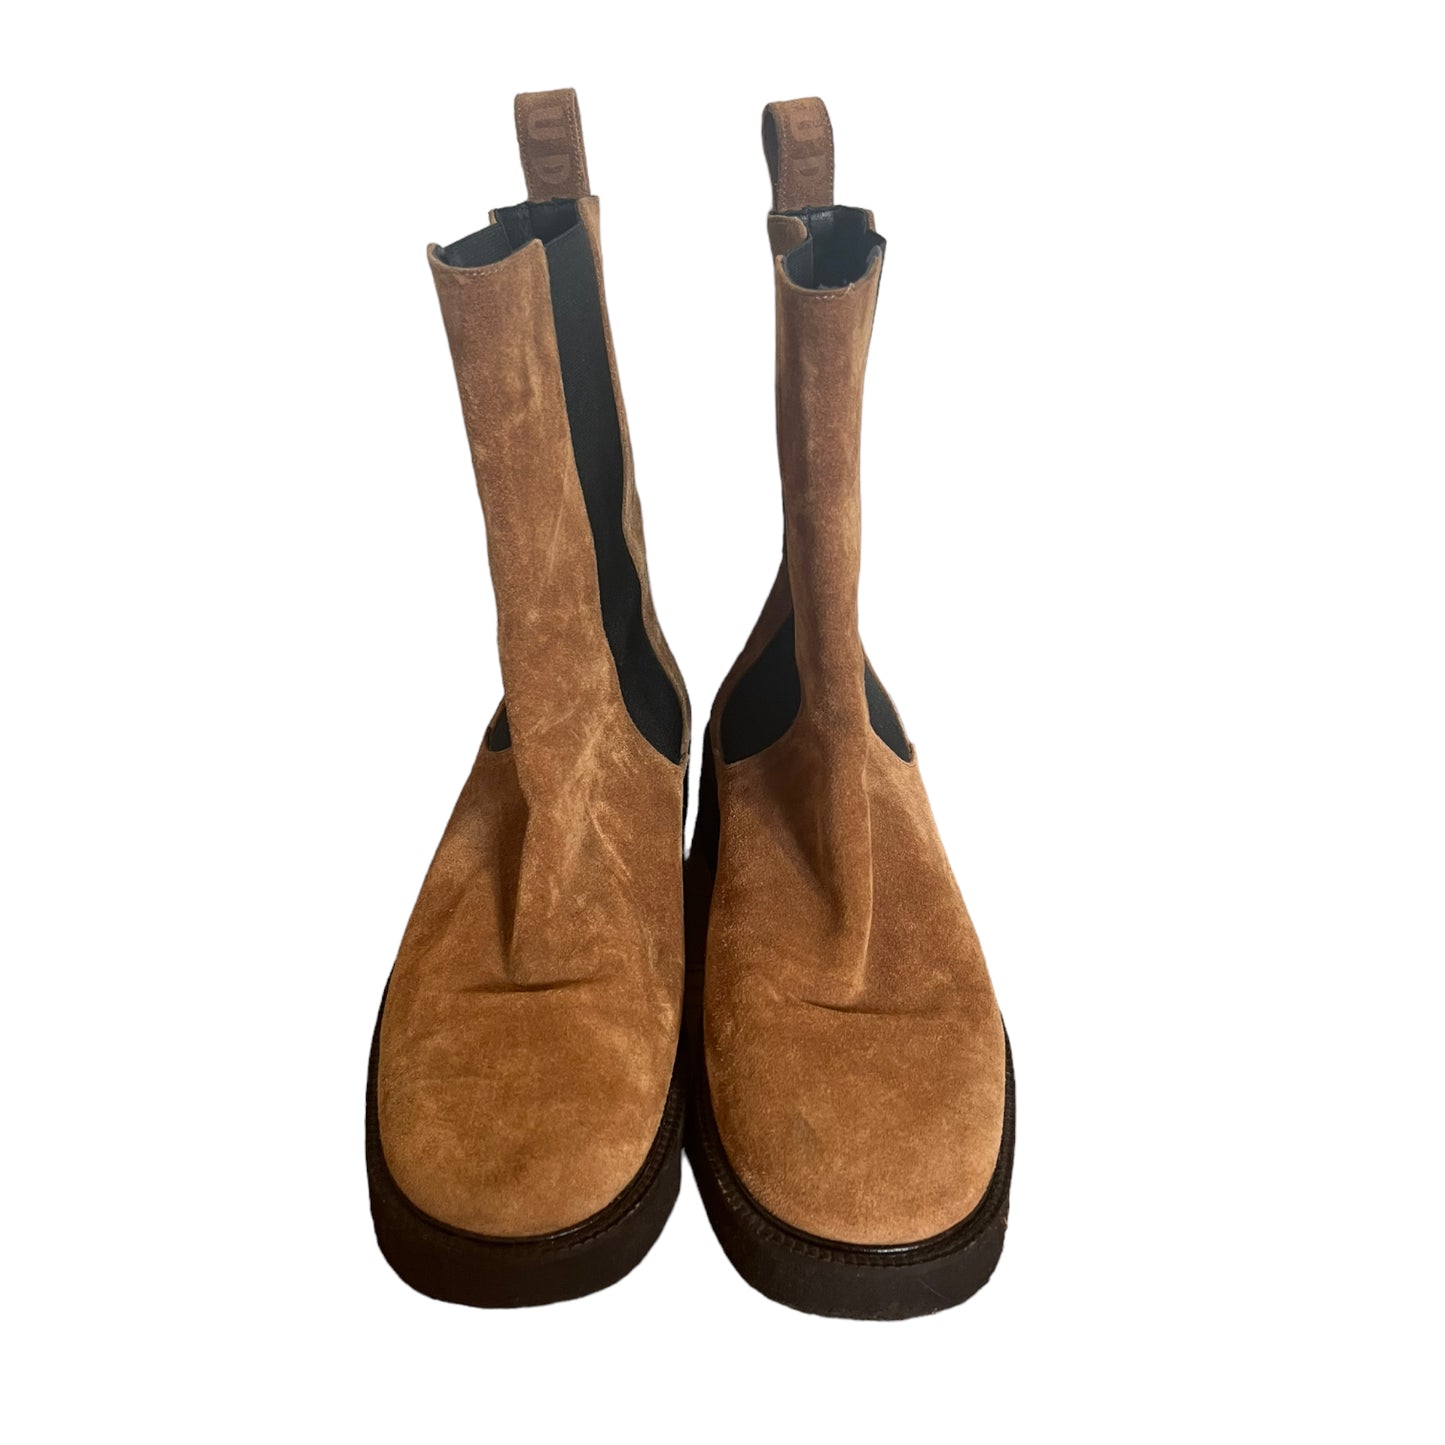 Staud Tan Suede Boots